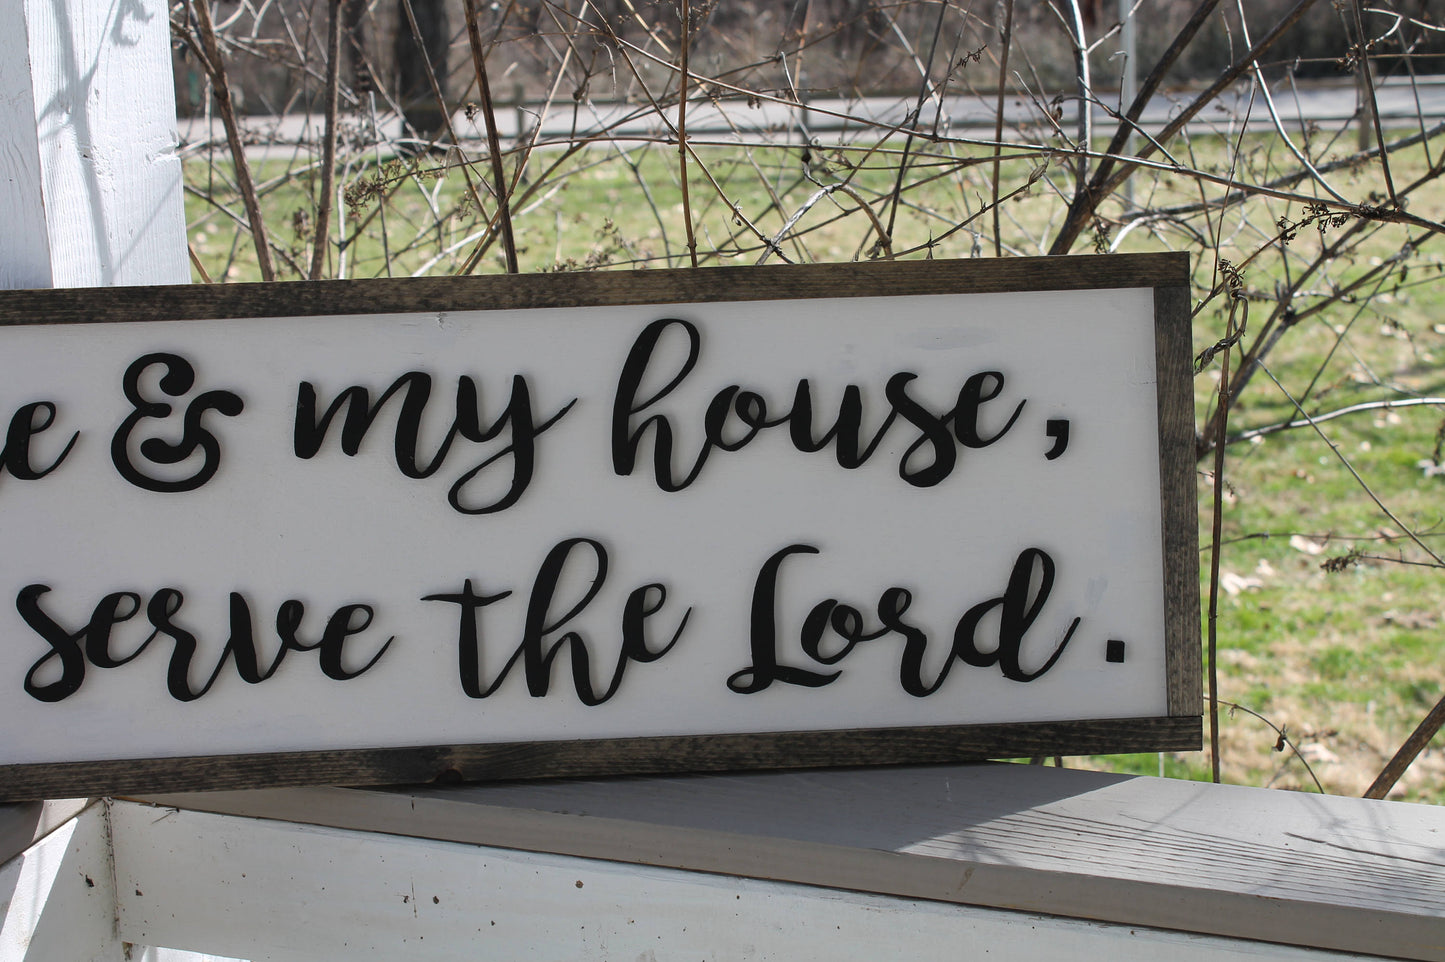 As for me and my House, We will Serve the Lord, Large, 3D, Wood, Laser Cut Out, 3D, Extra Large, Sign, Fireplace Sign, Footstepsinthepast